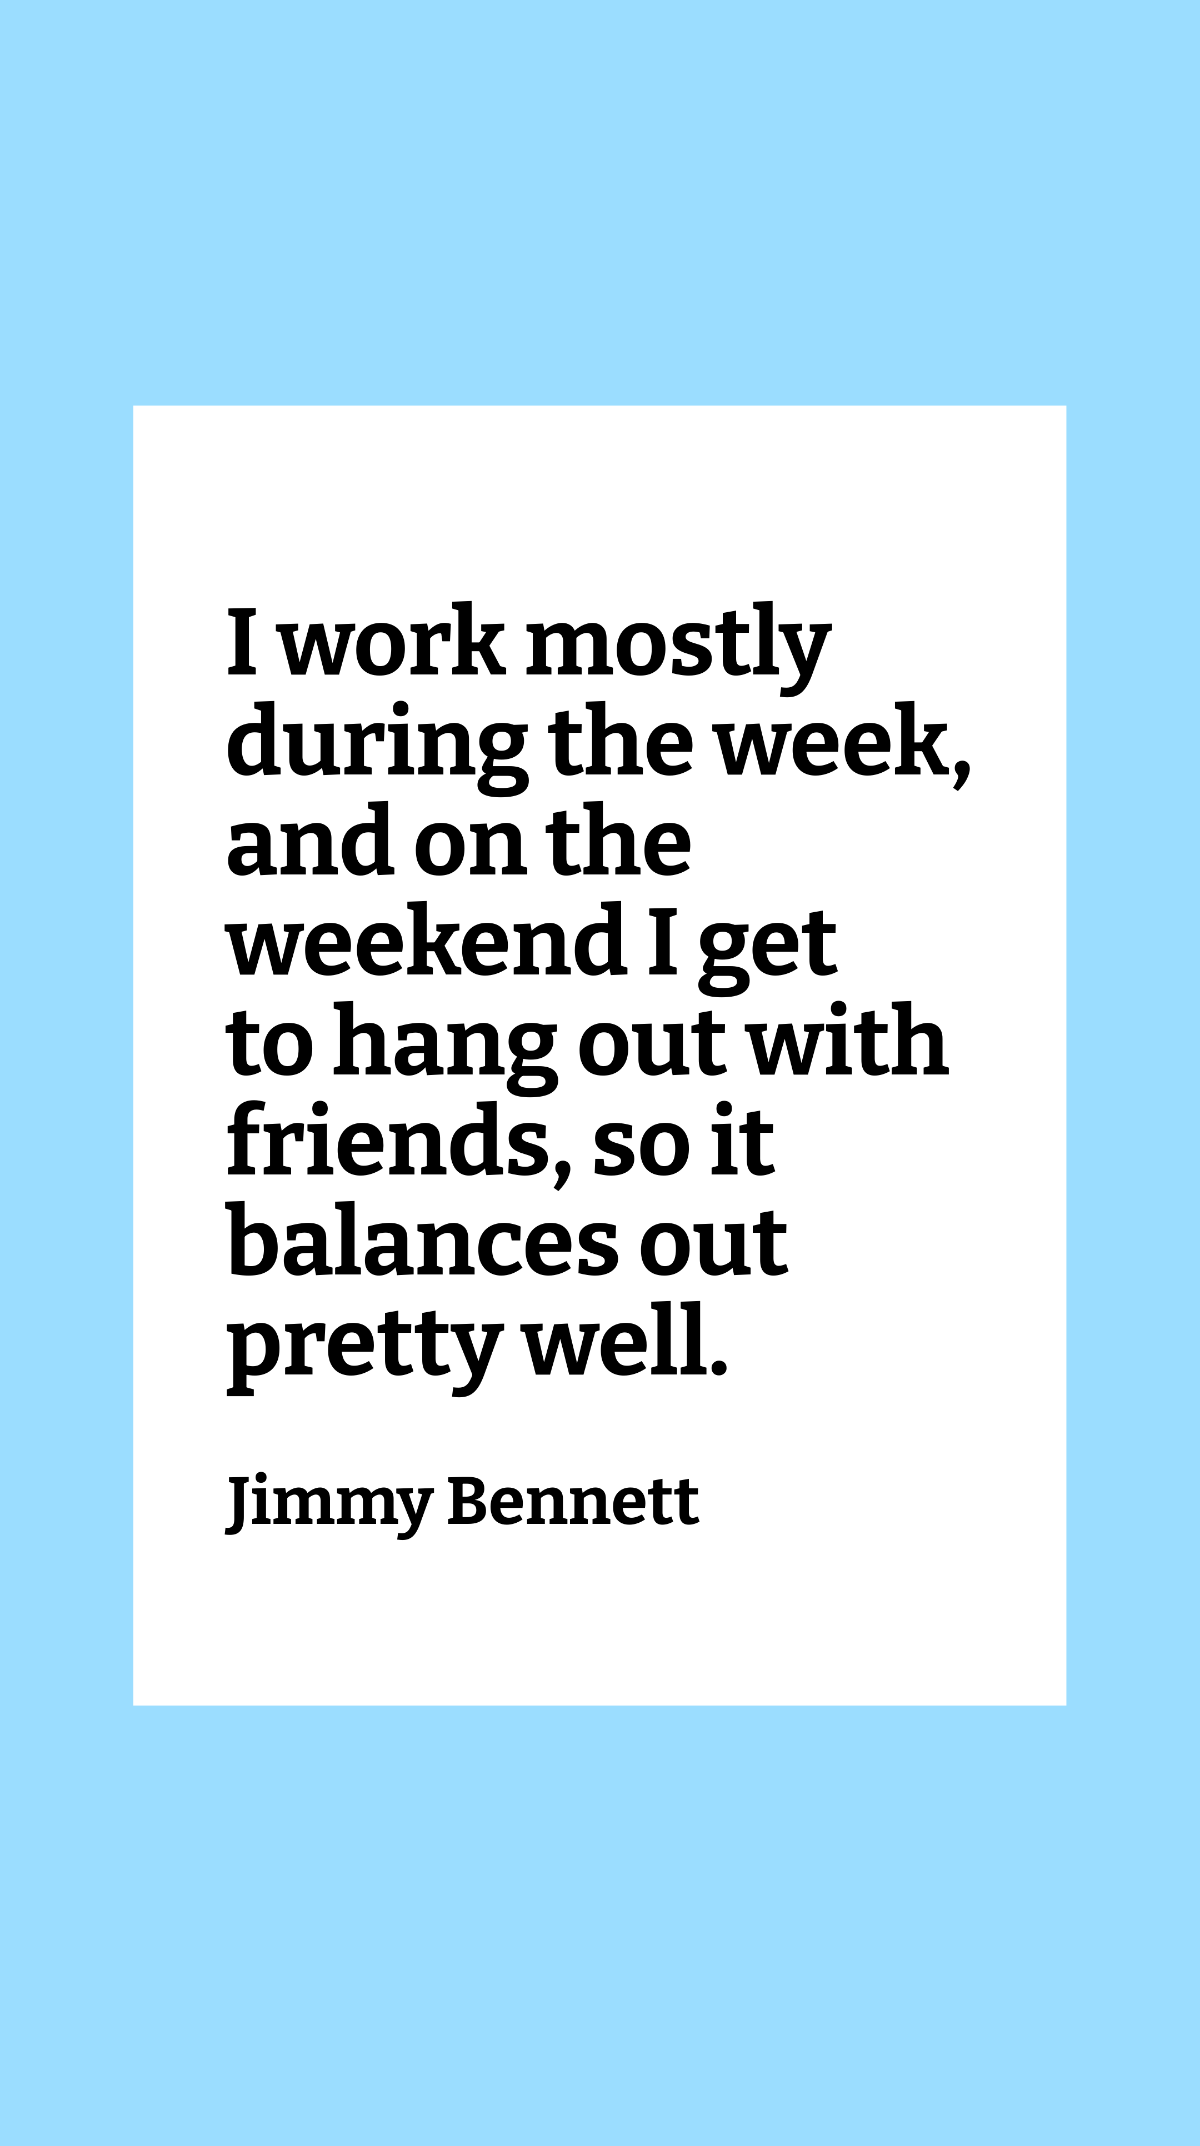 Jimmy Bennett - I work mostly during the week, and on the weekend I get to hang out with friends, so it balances out pretty well. Template